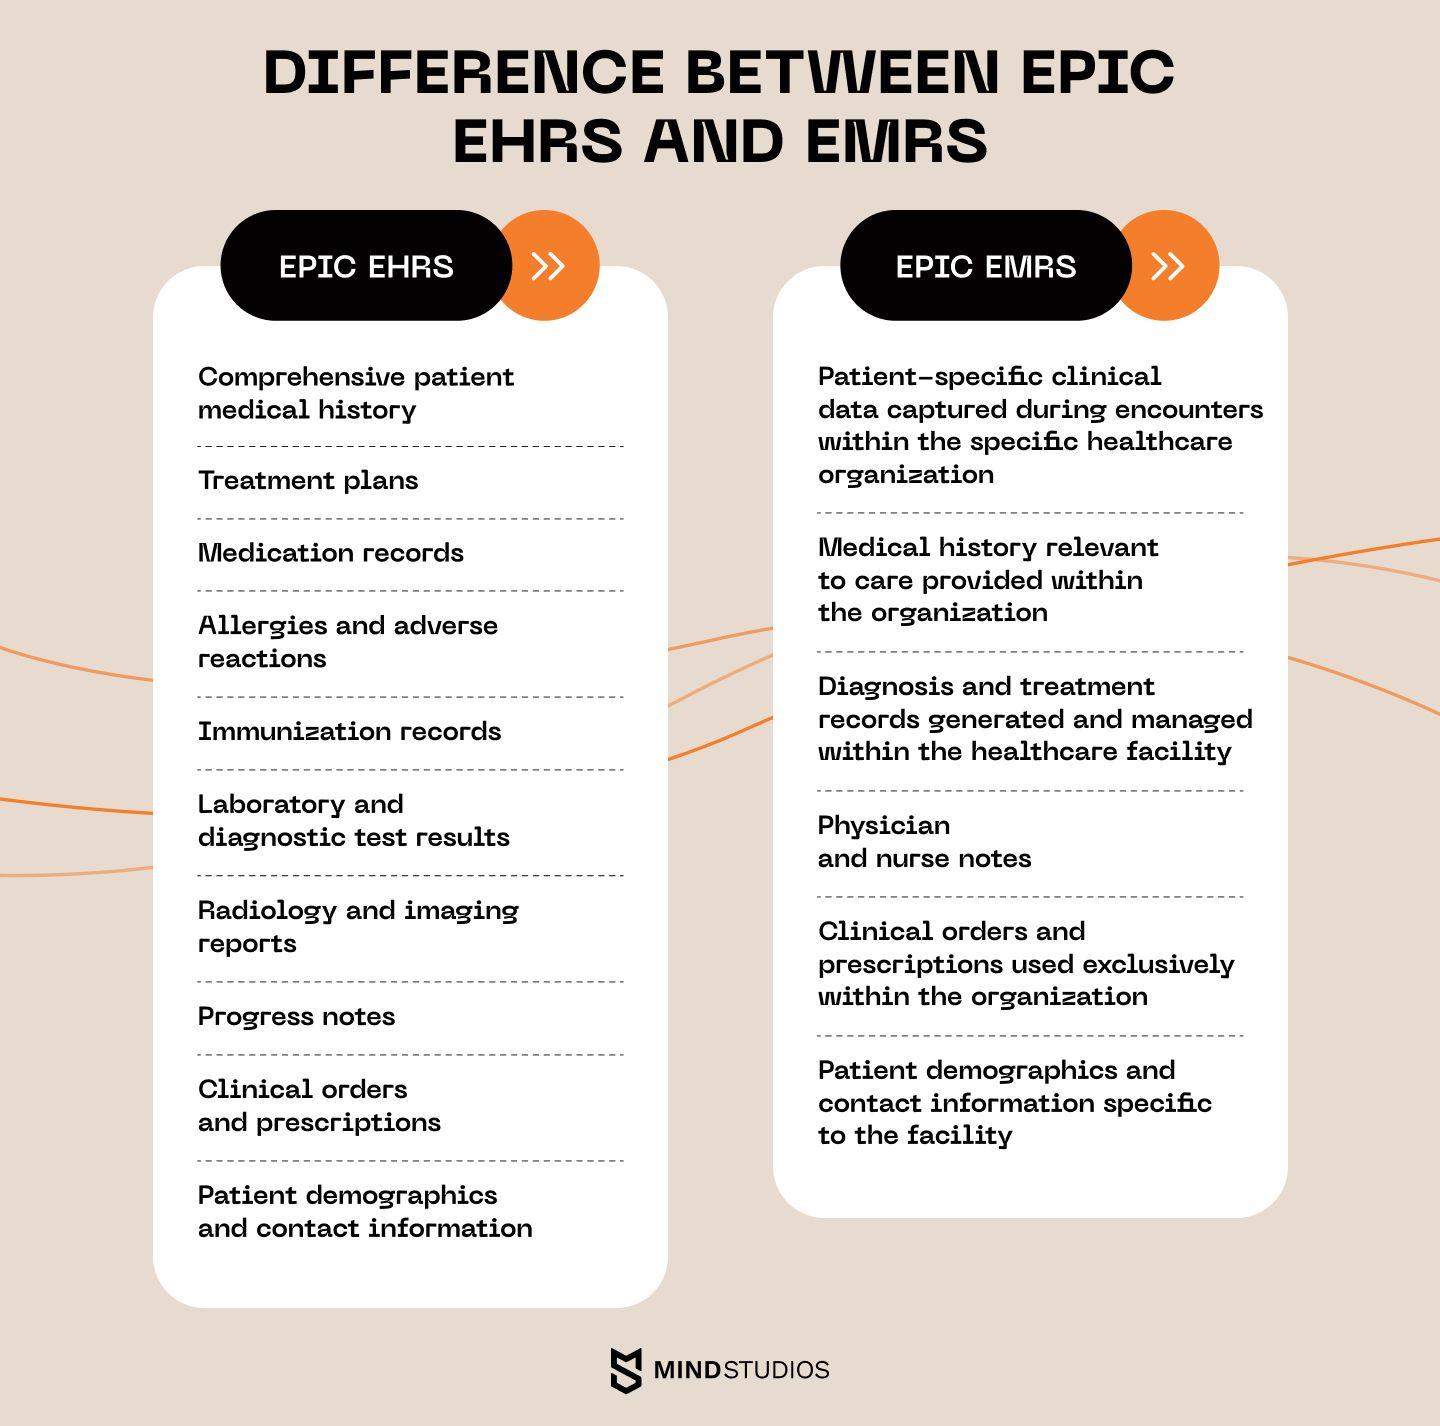 Difference between Epic EHRs and EMRs